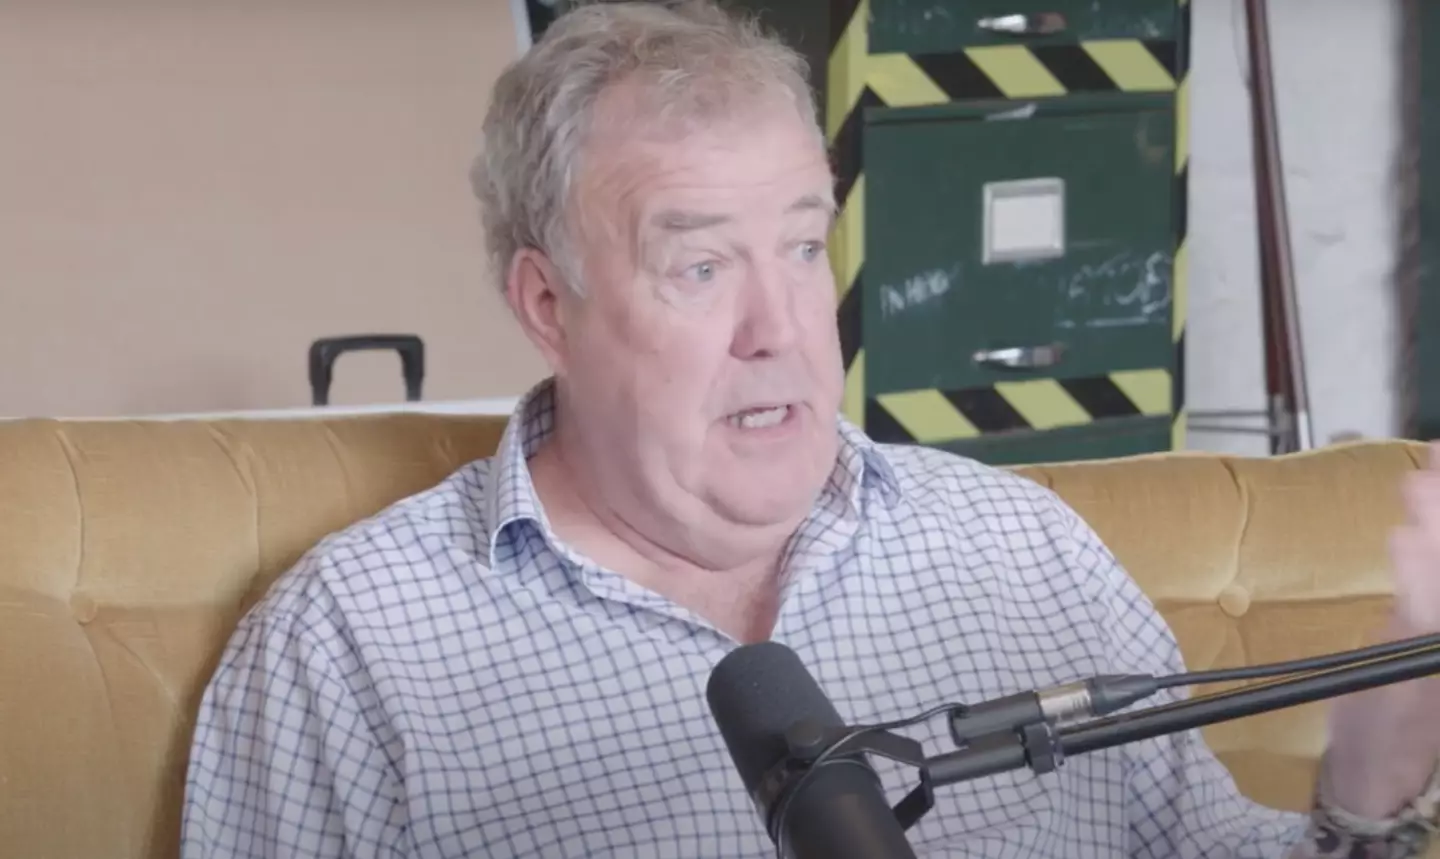 Clarkson spoke about the incident on the Performance People podcast.